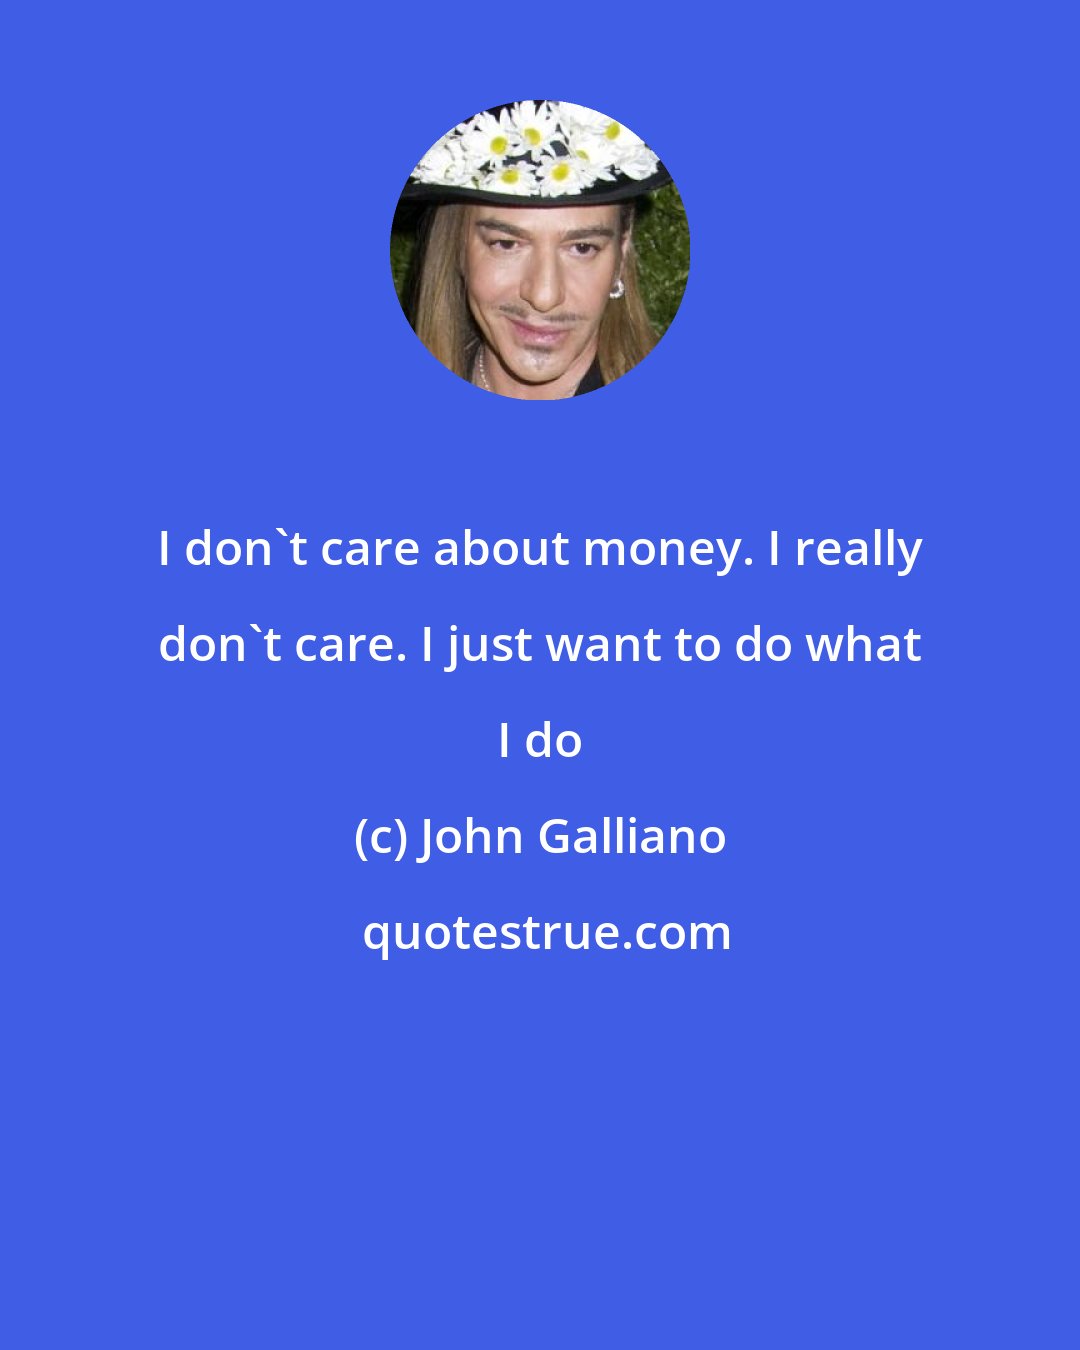 John Galliano: I don't care about money. I really don't care. I just want to do what I do